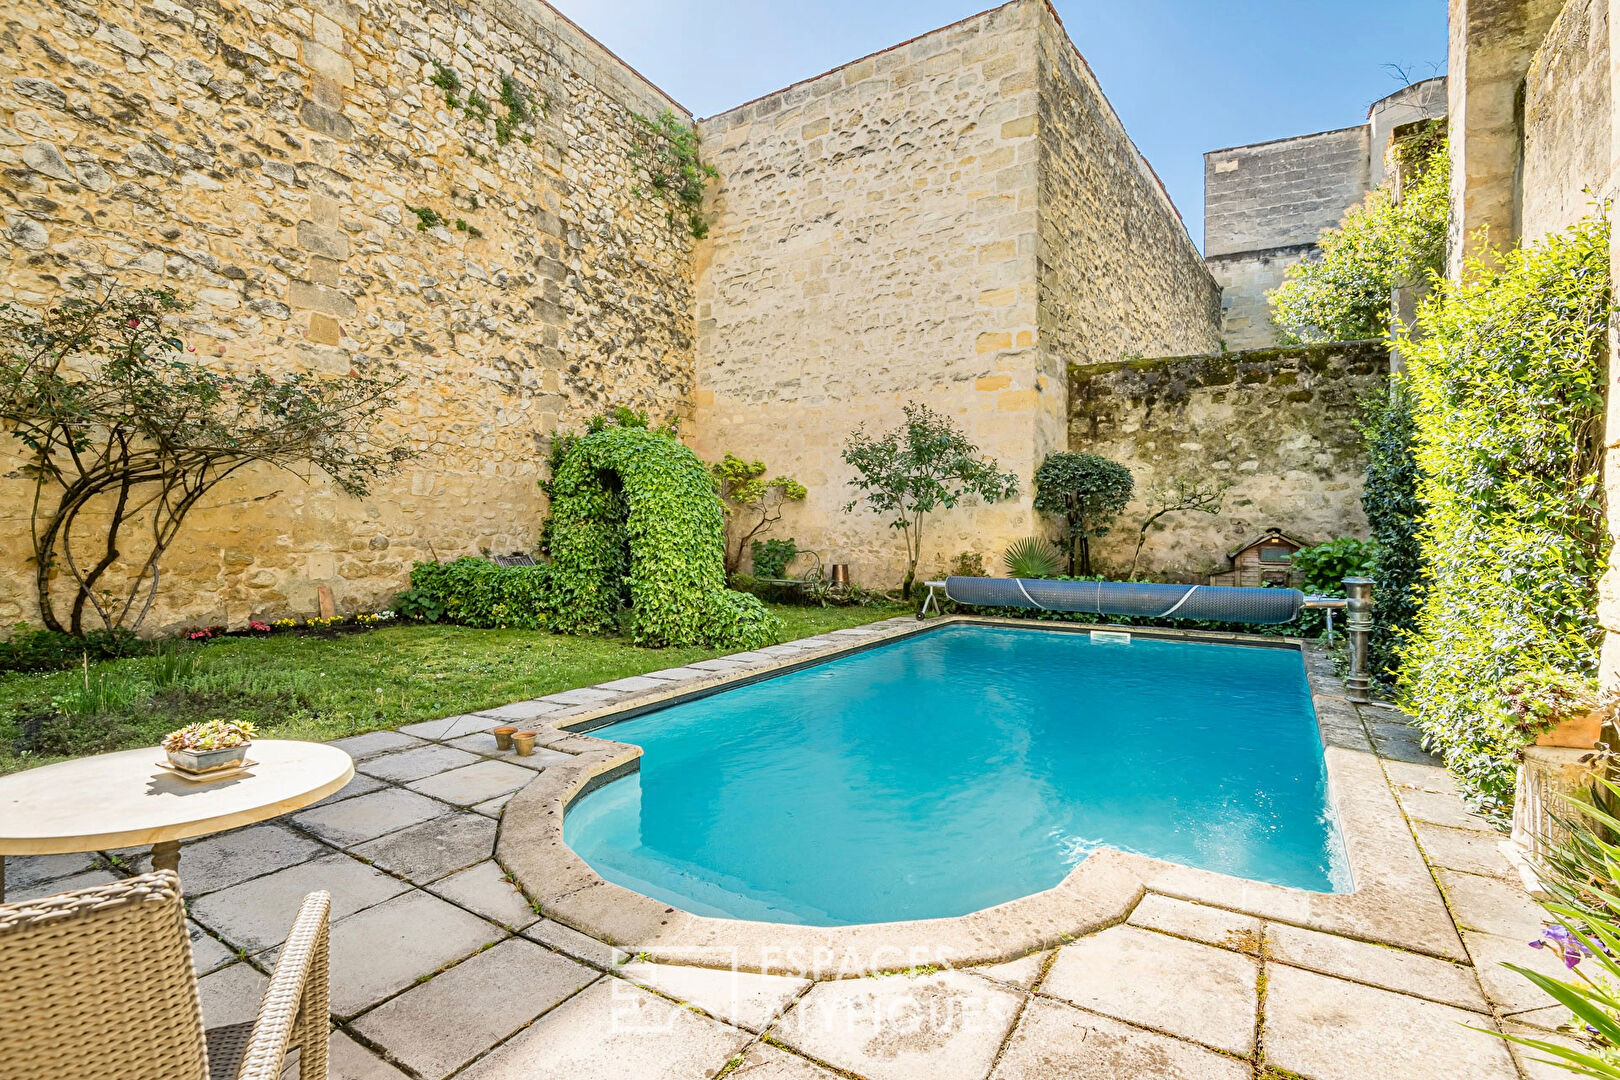 Bourgeois house with garden and swimming pool in the heart of Bordeaux